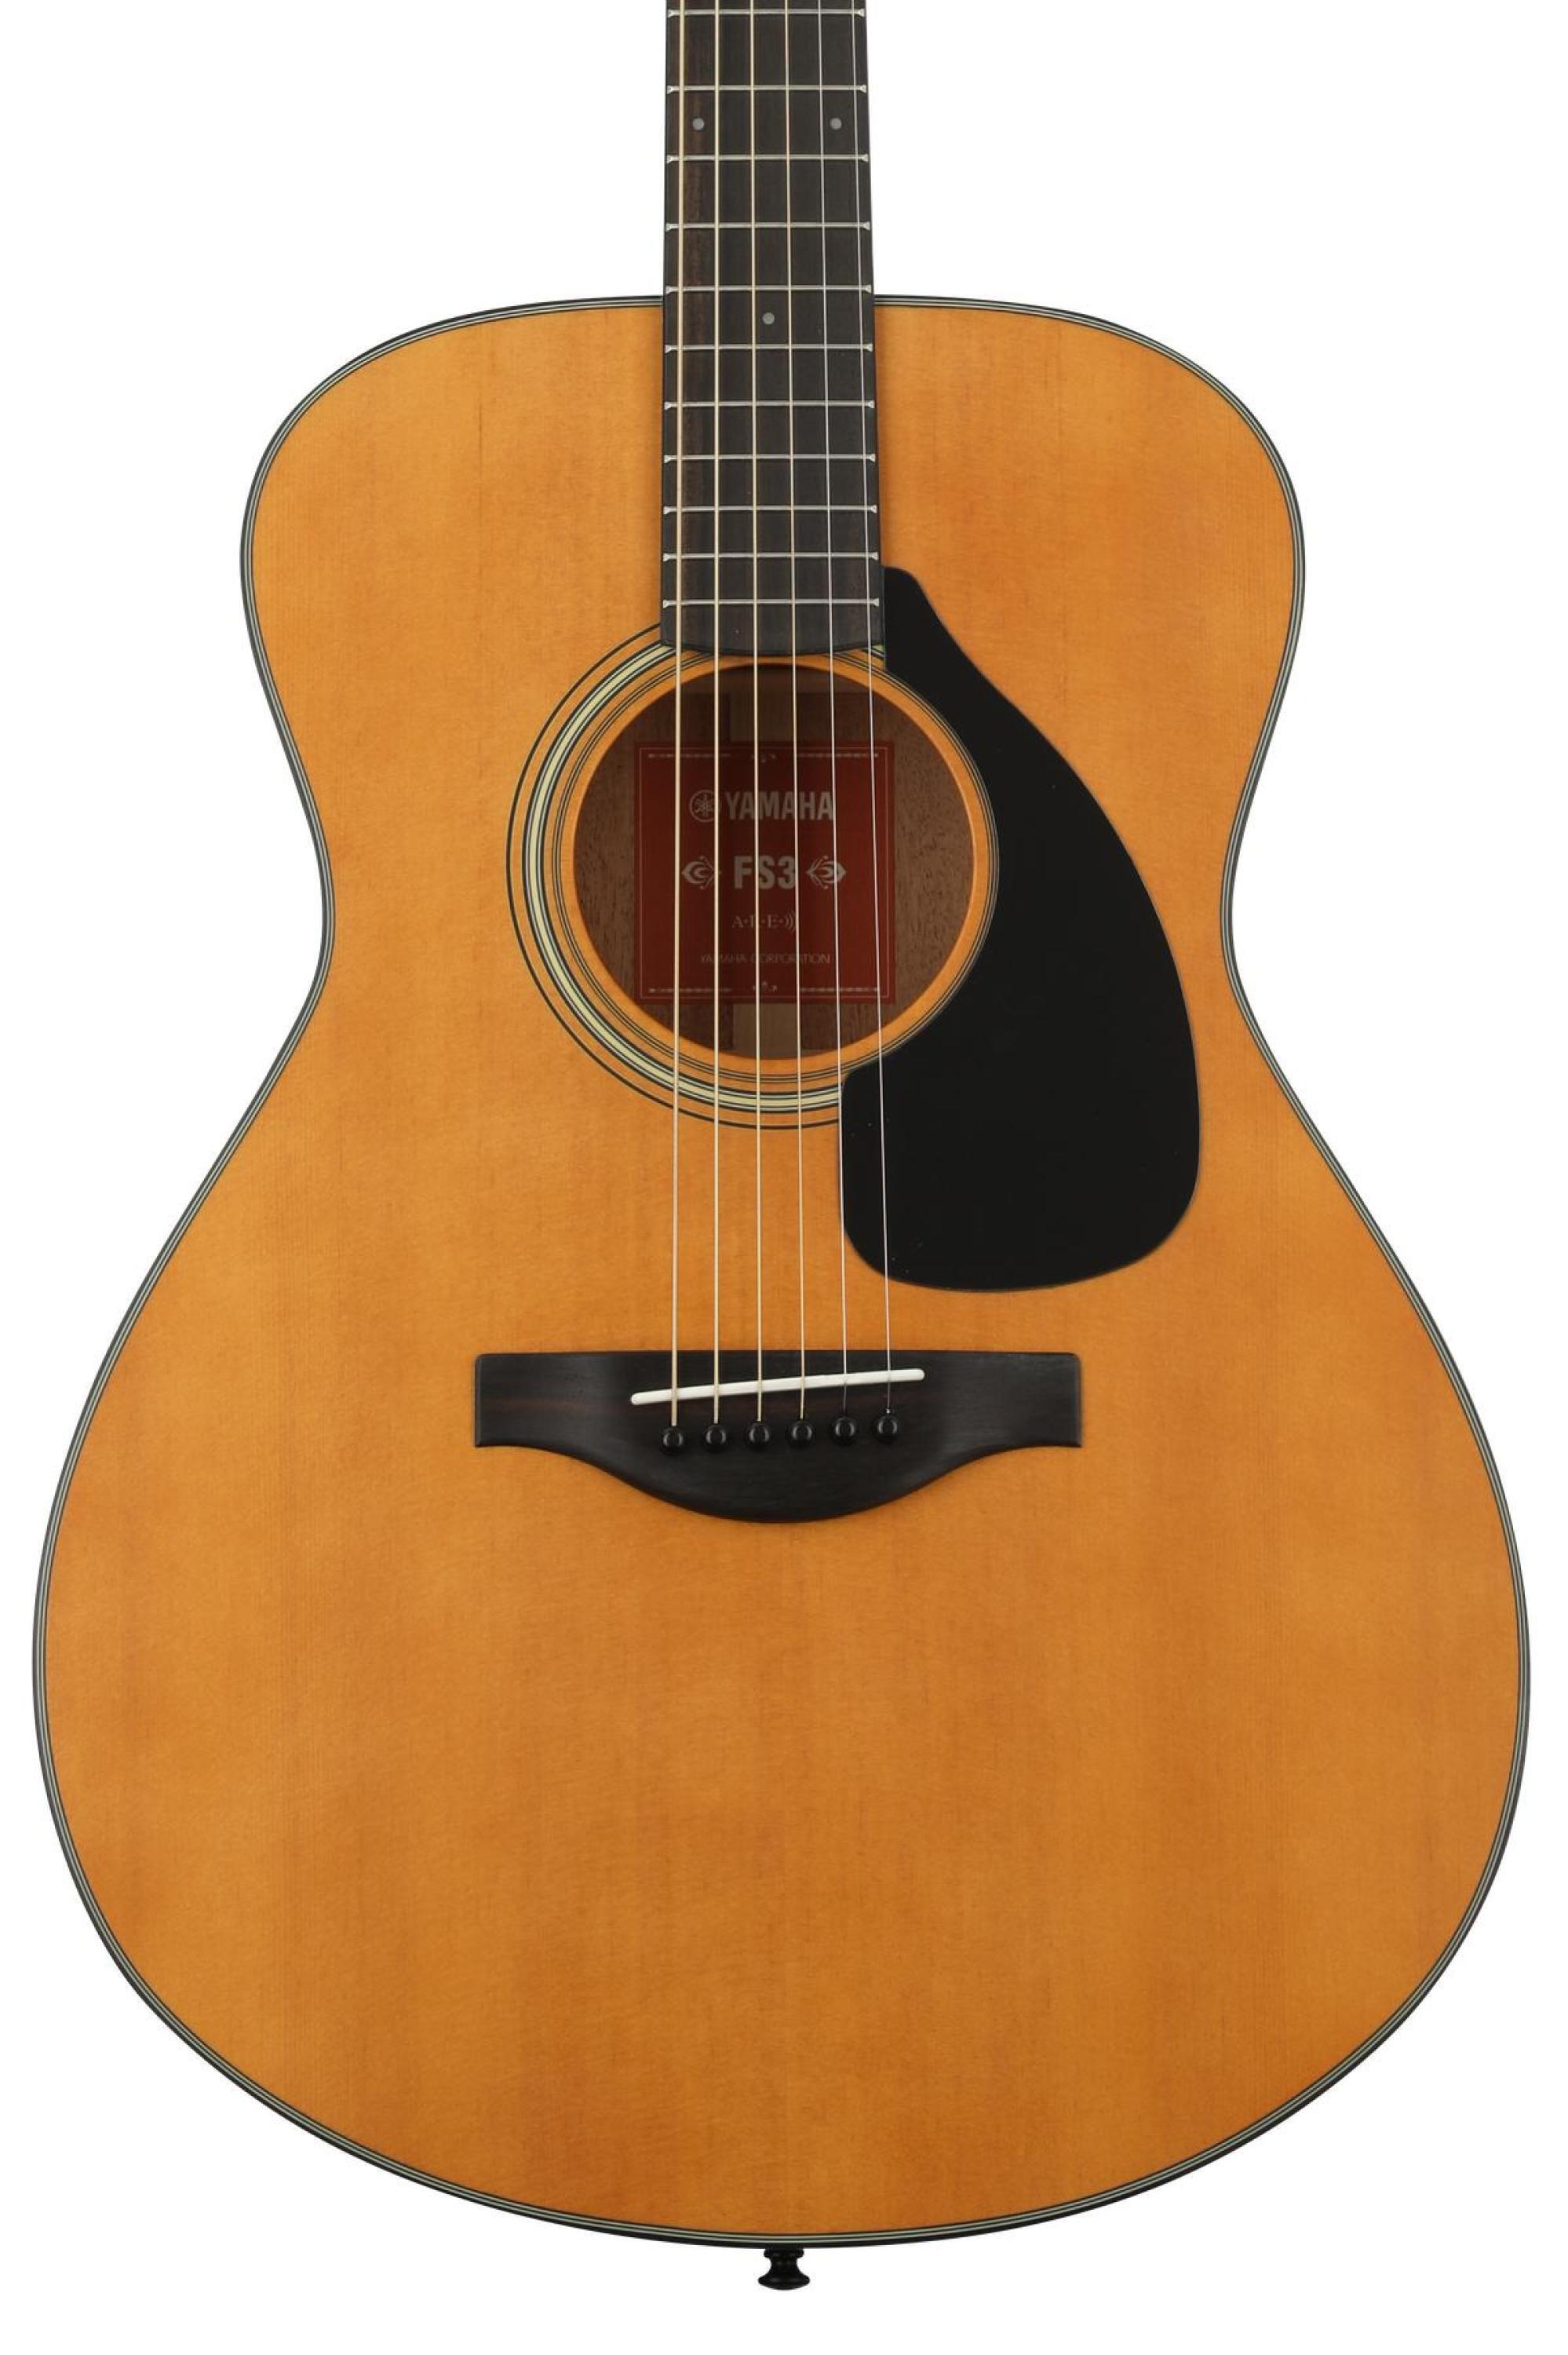 Yamaha Red Label FS3 Acoustic Guitar - Natural | Sweetwater